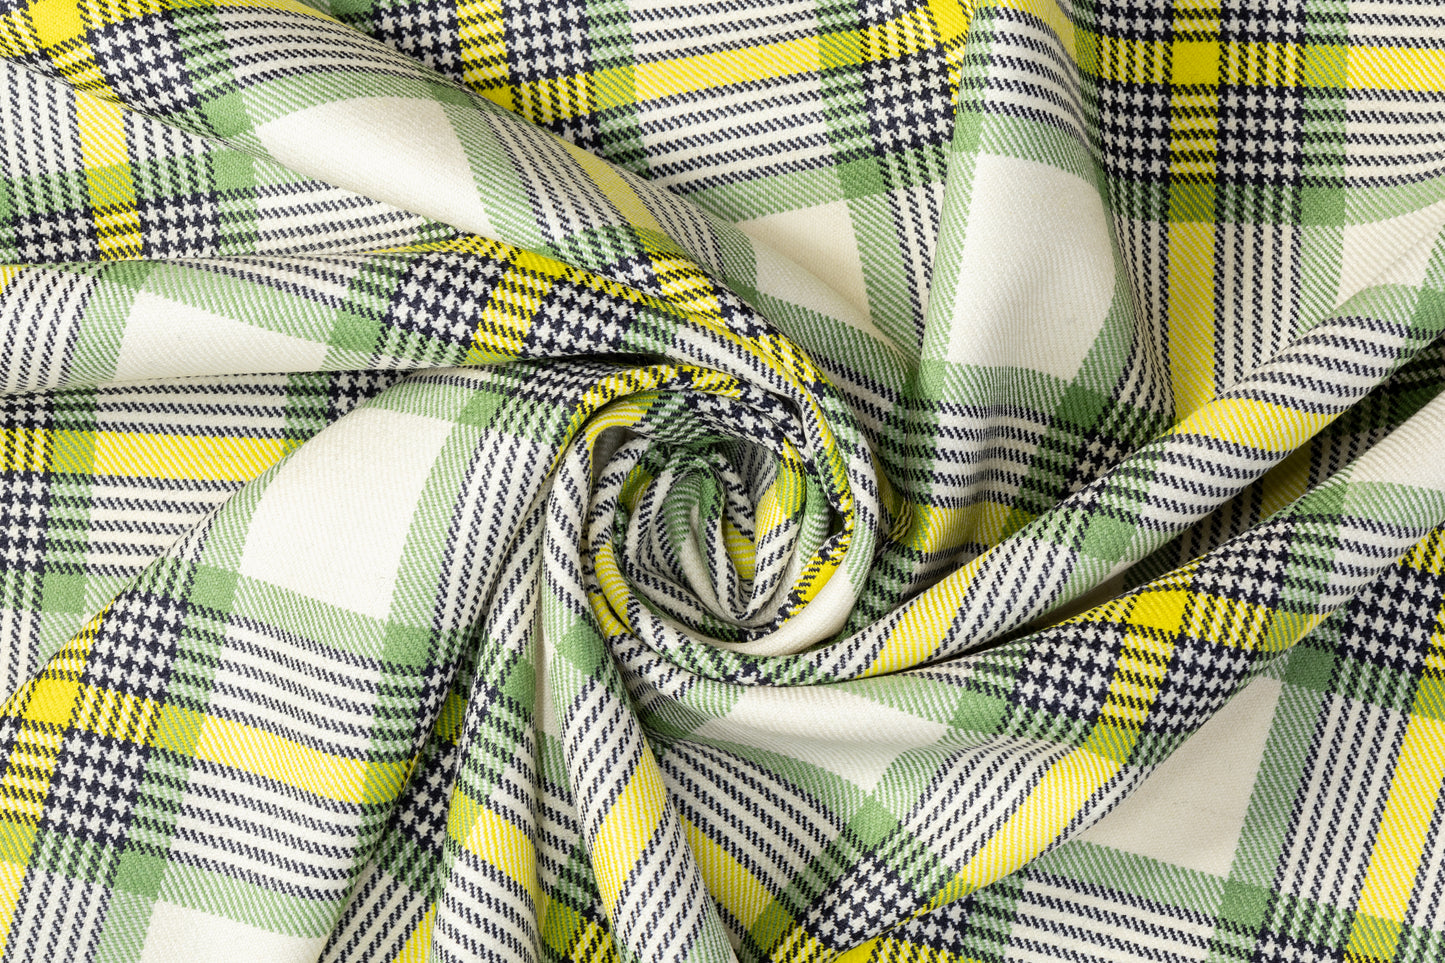 Checked Italian Wool Suiting - Green / Yellow / White